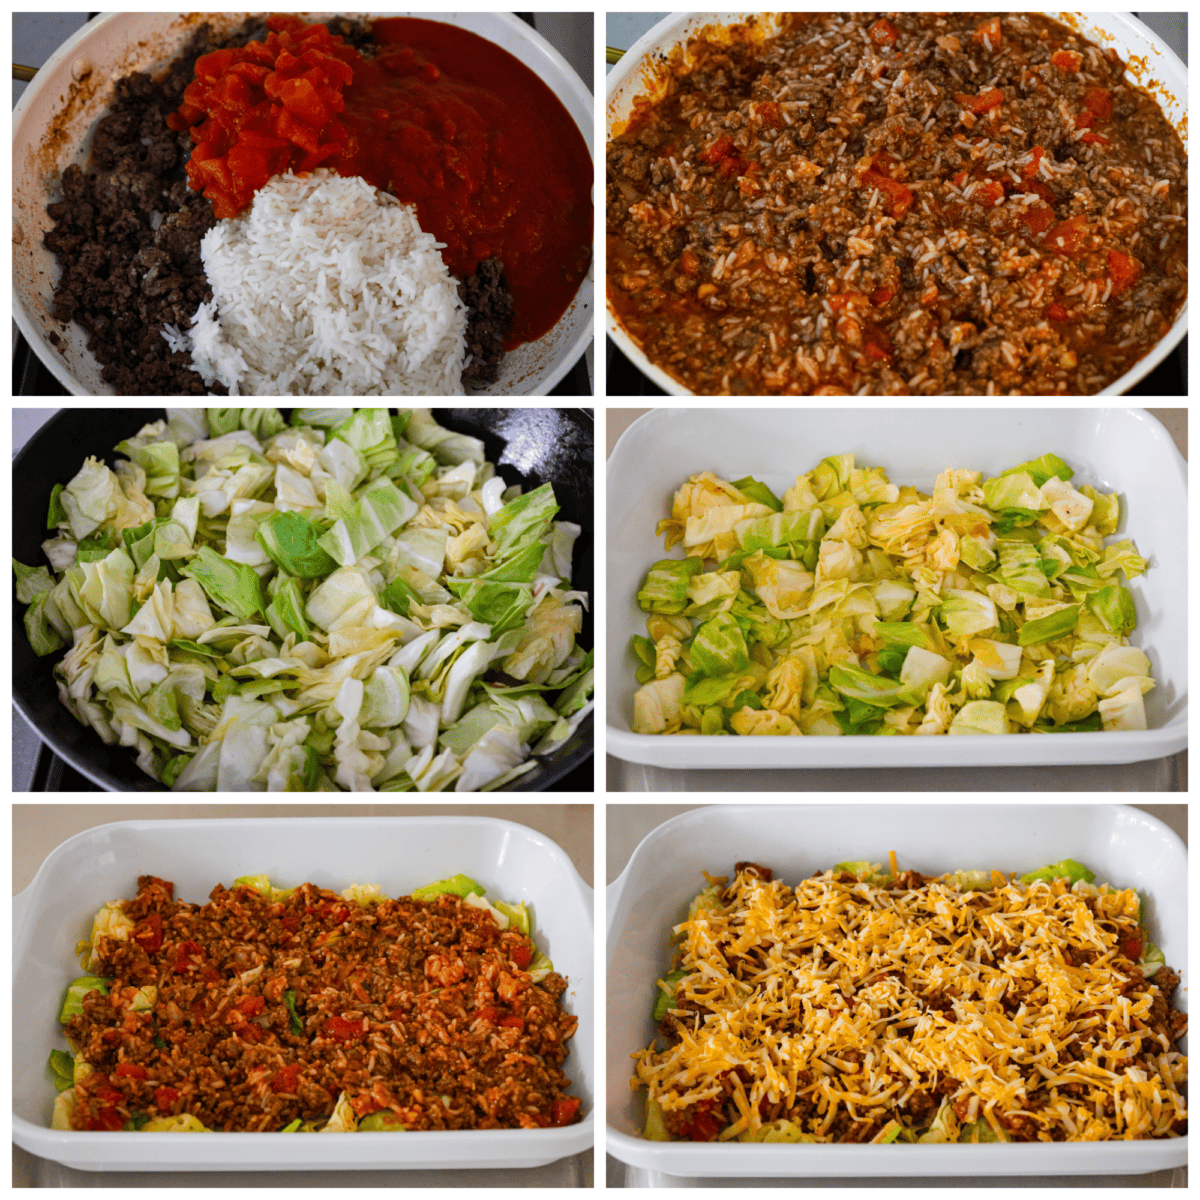 First process photo of the cooked meat, rice, tomatoes, and marinara in a skillet. Second process photo of the meat mixture mixed in a skillet. Third photo of the cabbage cooking in a pan. Fourth photo of the cooked cabbage in a casserole dish. Fifth process photo of the meat mixture layered on top of the cabbage. Sixth process picture of the cheese sprinkled on top.